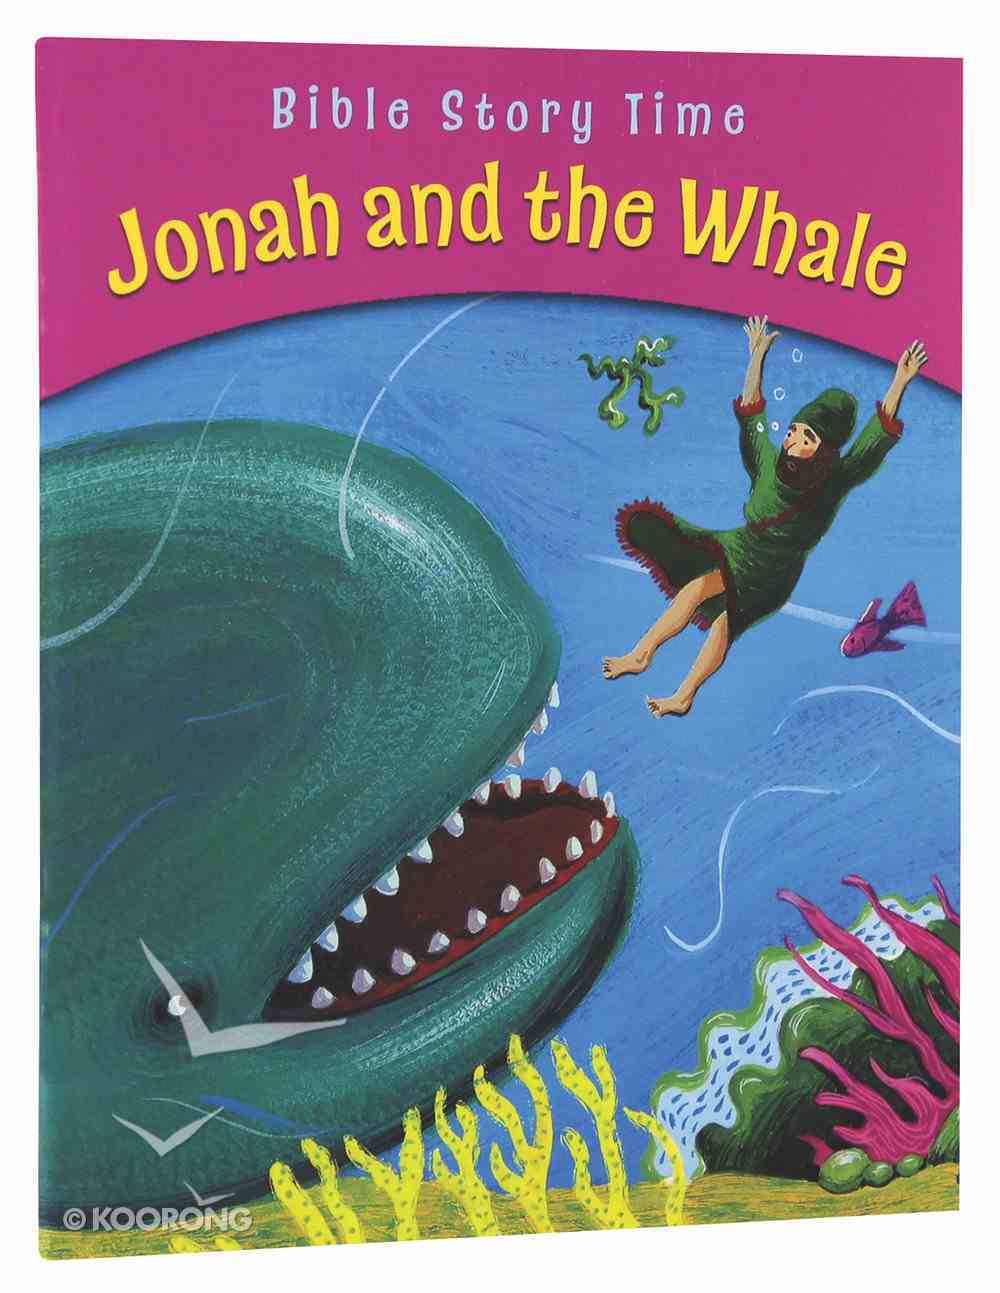 Jonah and the Whale (Bible Story Time Old Testament Series) by Sophie ...